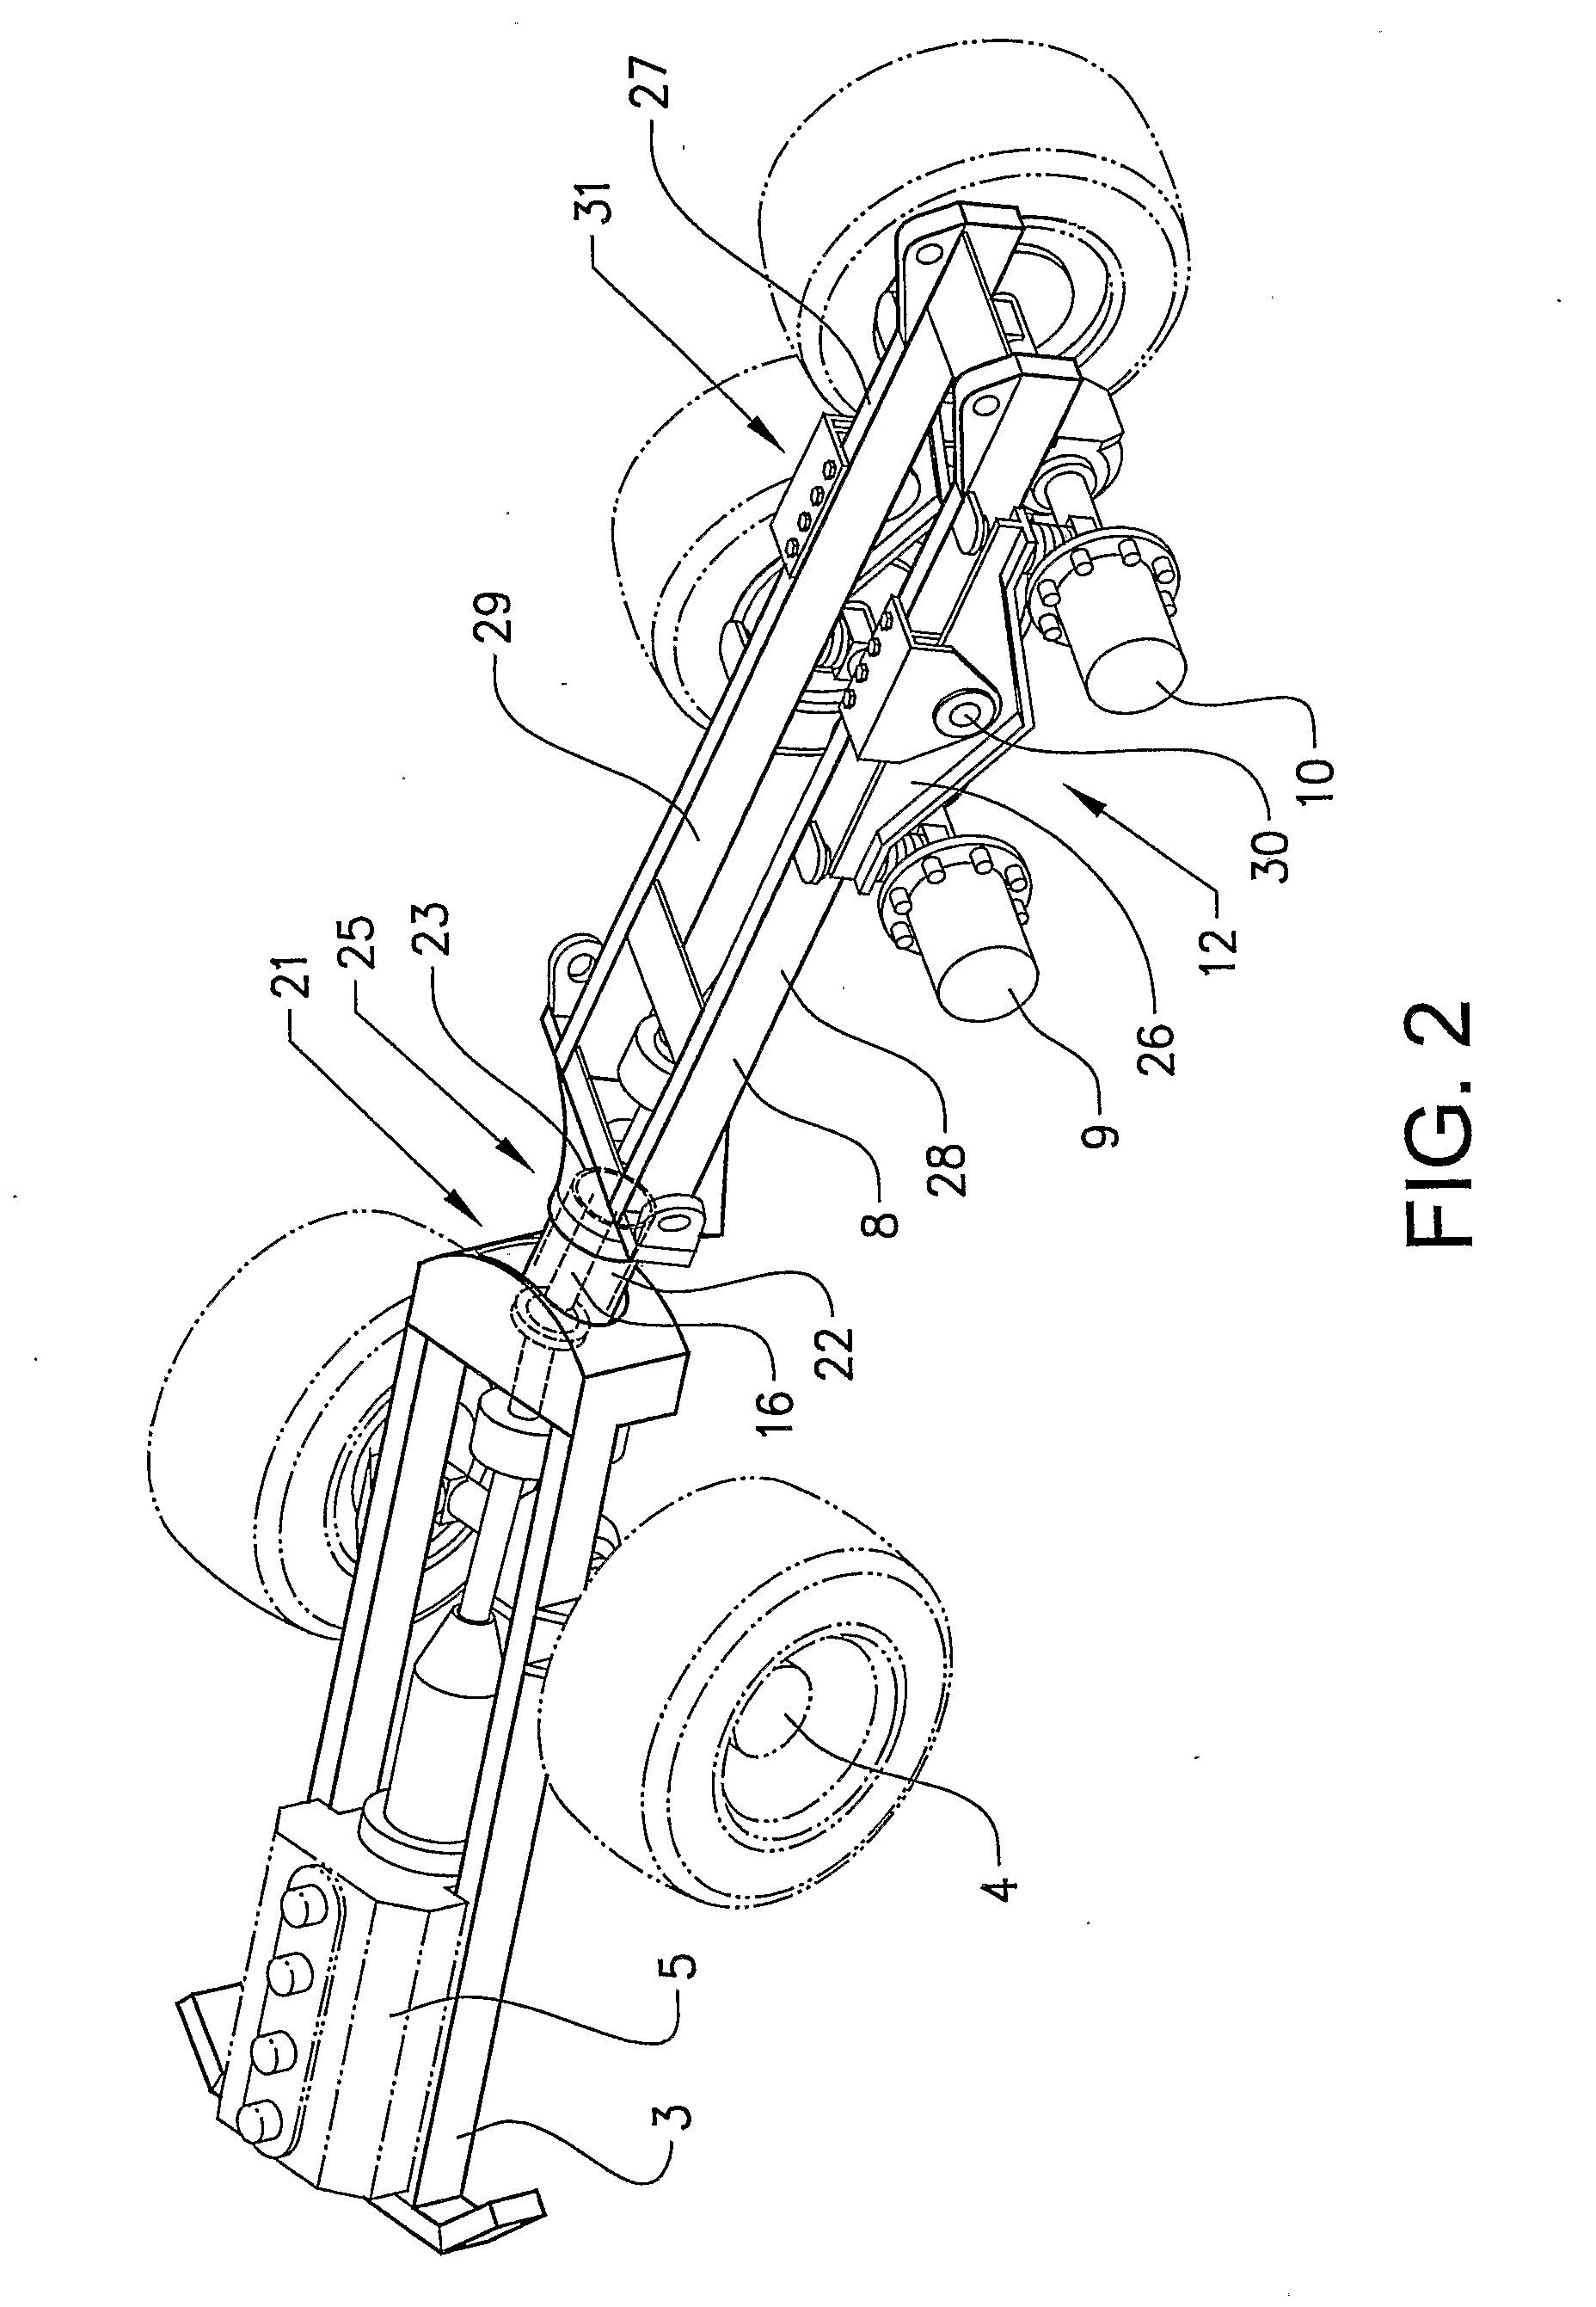 Straight motion assisting device for a work machine